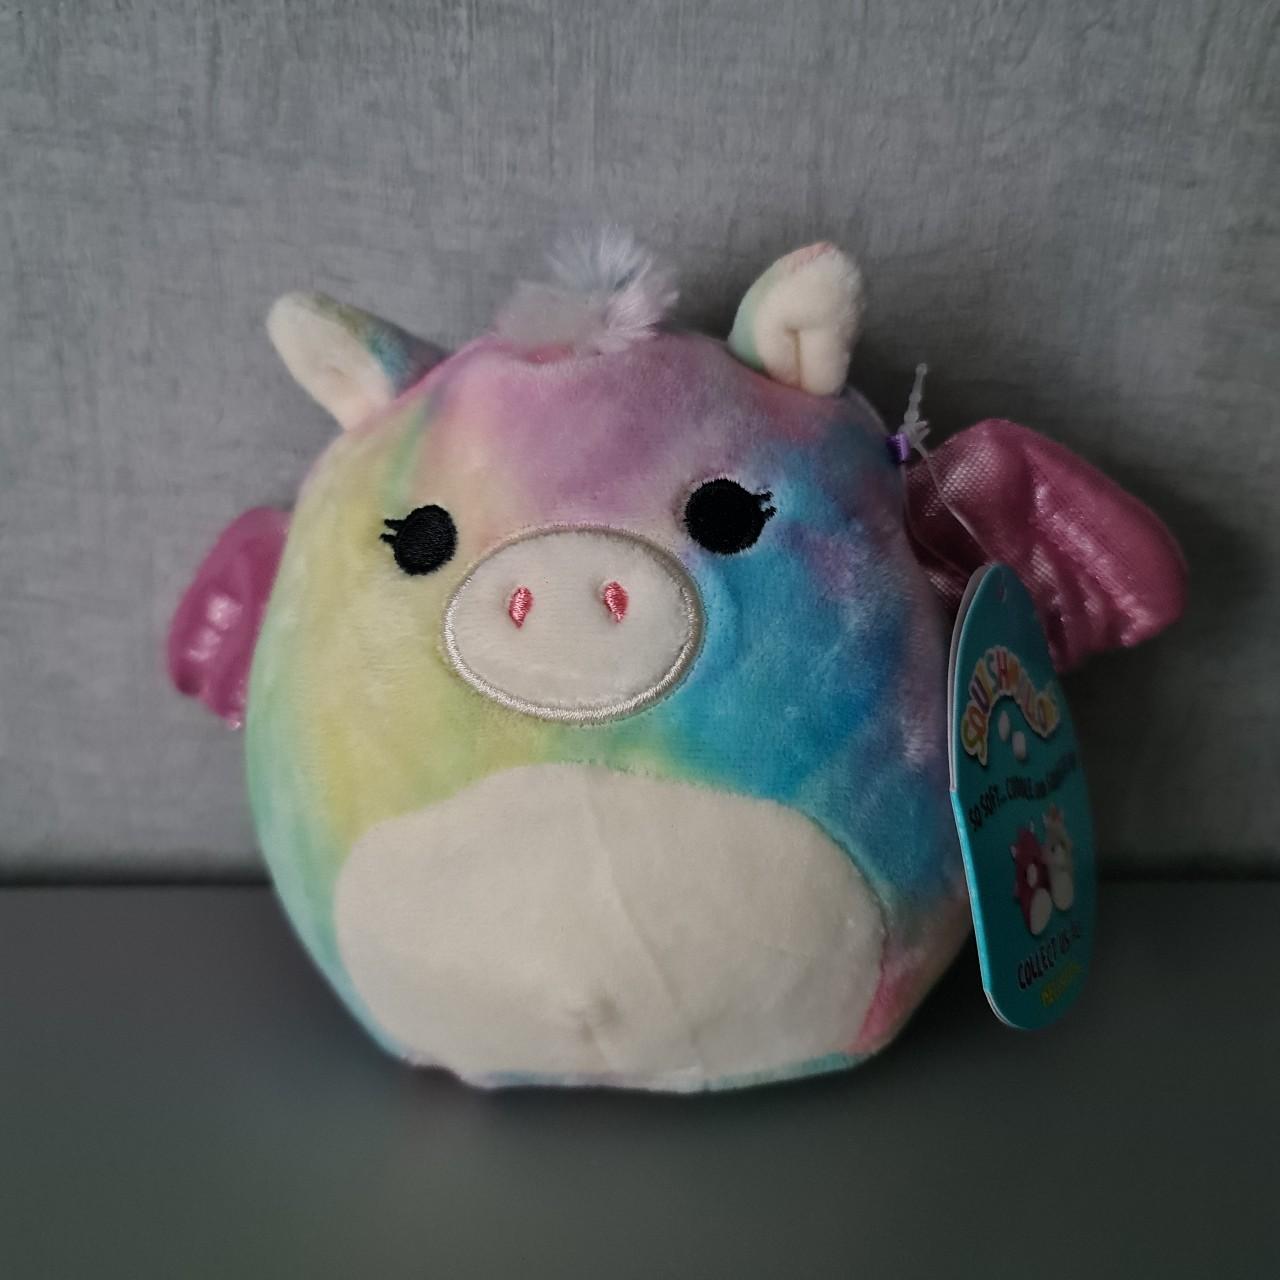 Product Image 1 - Jaime 5 inch squishmallow.
Brand new